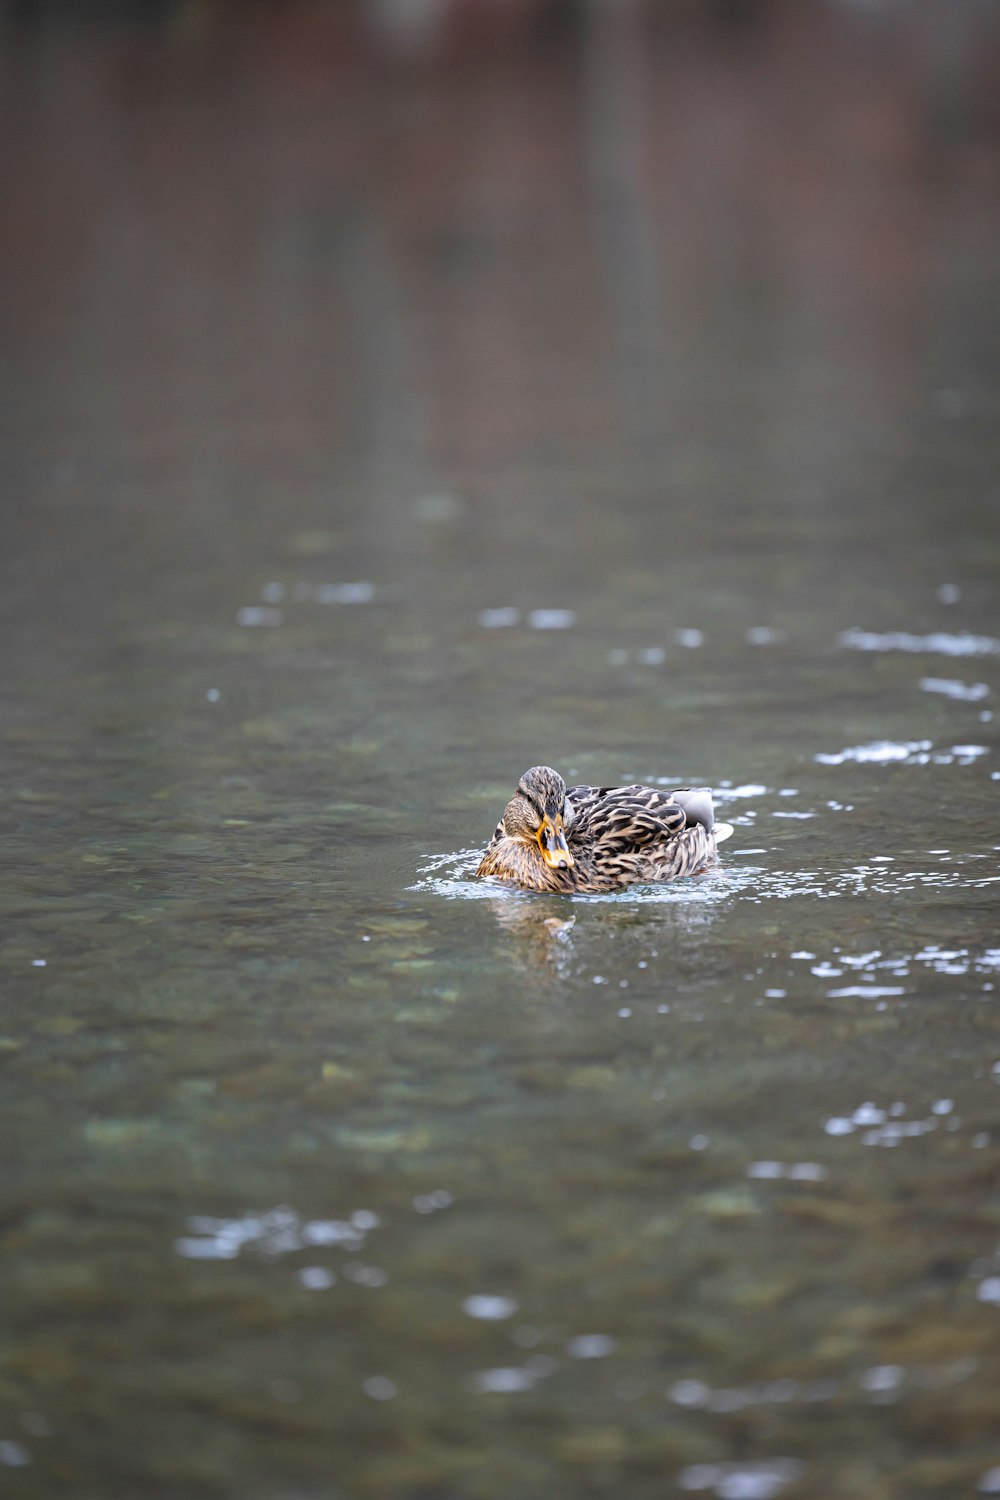 a duck is swimming in a body of water